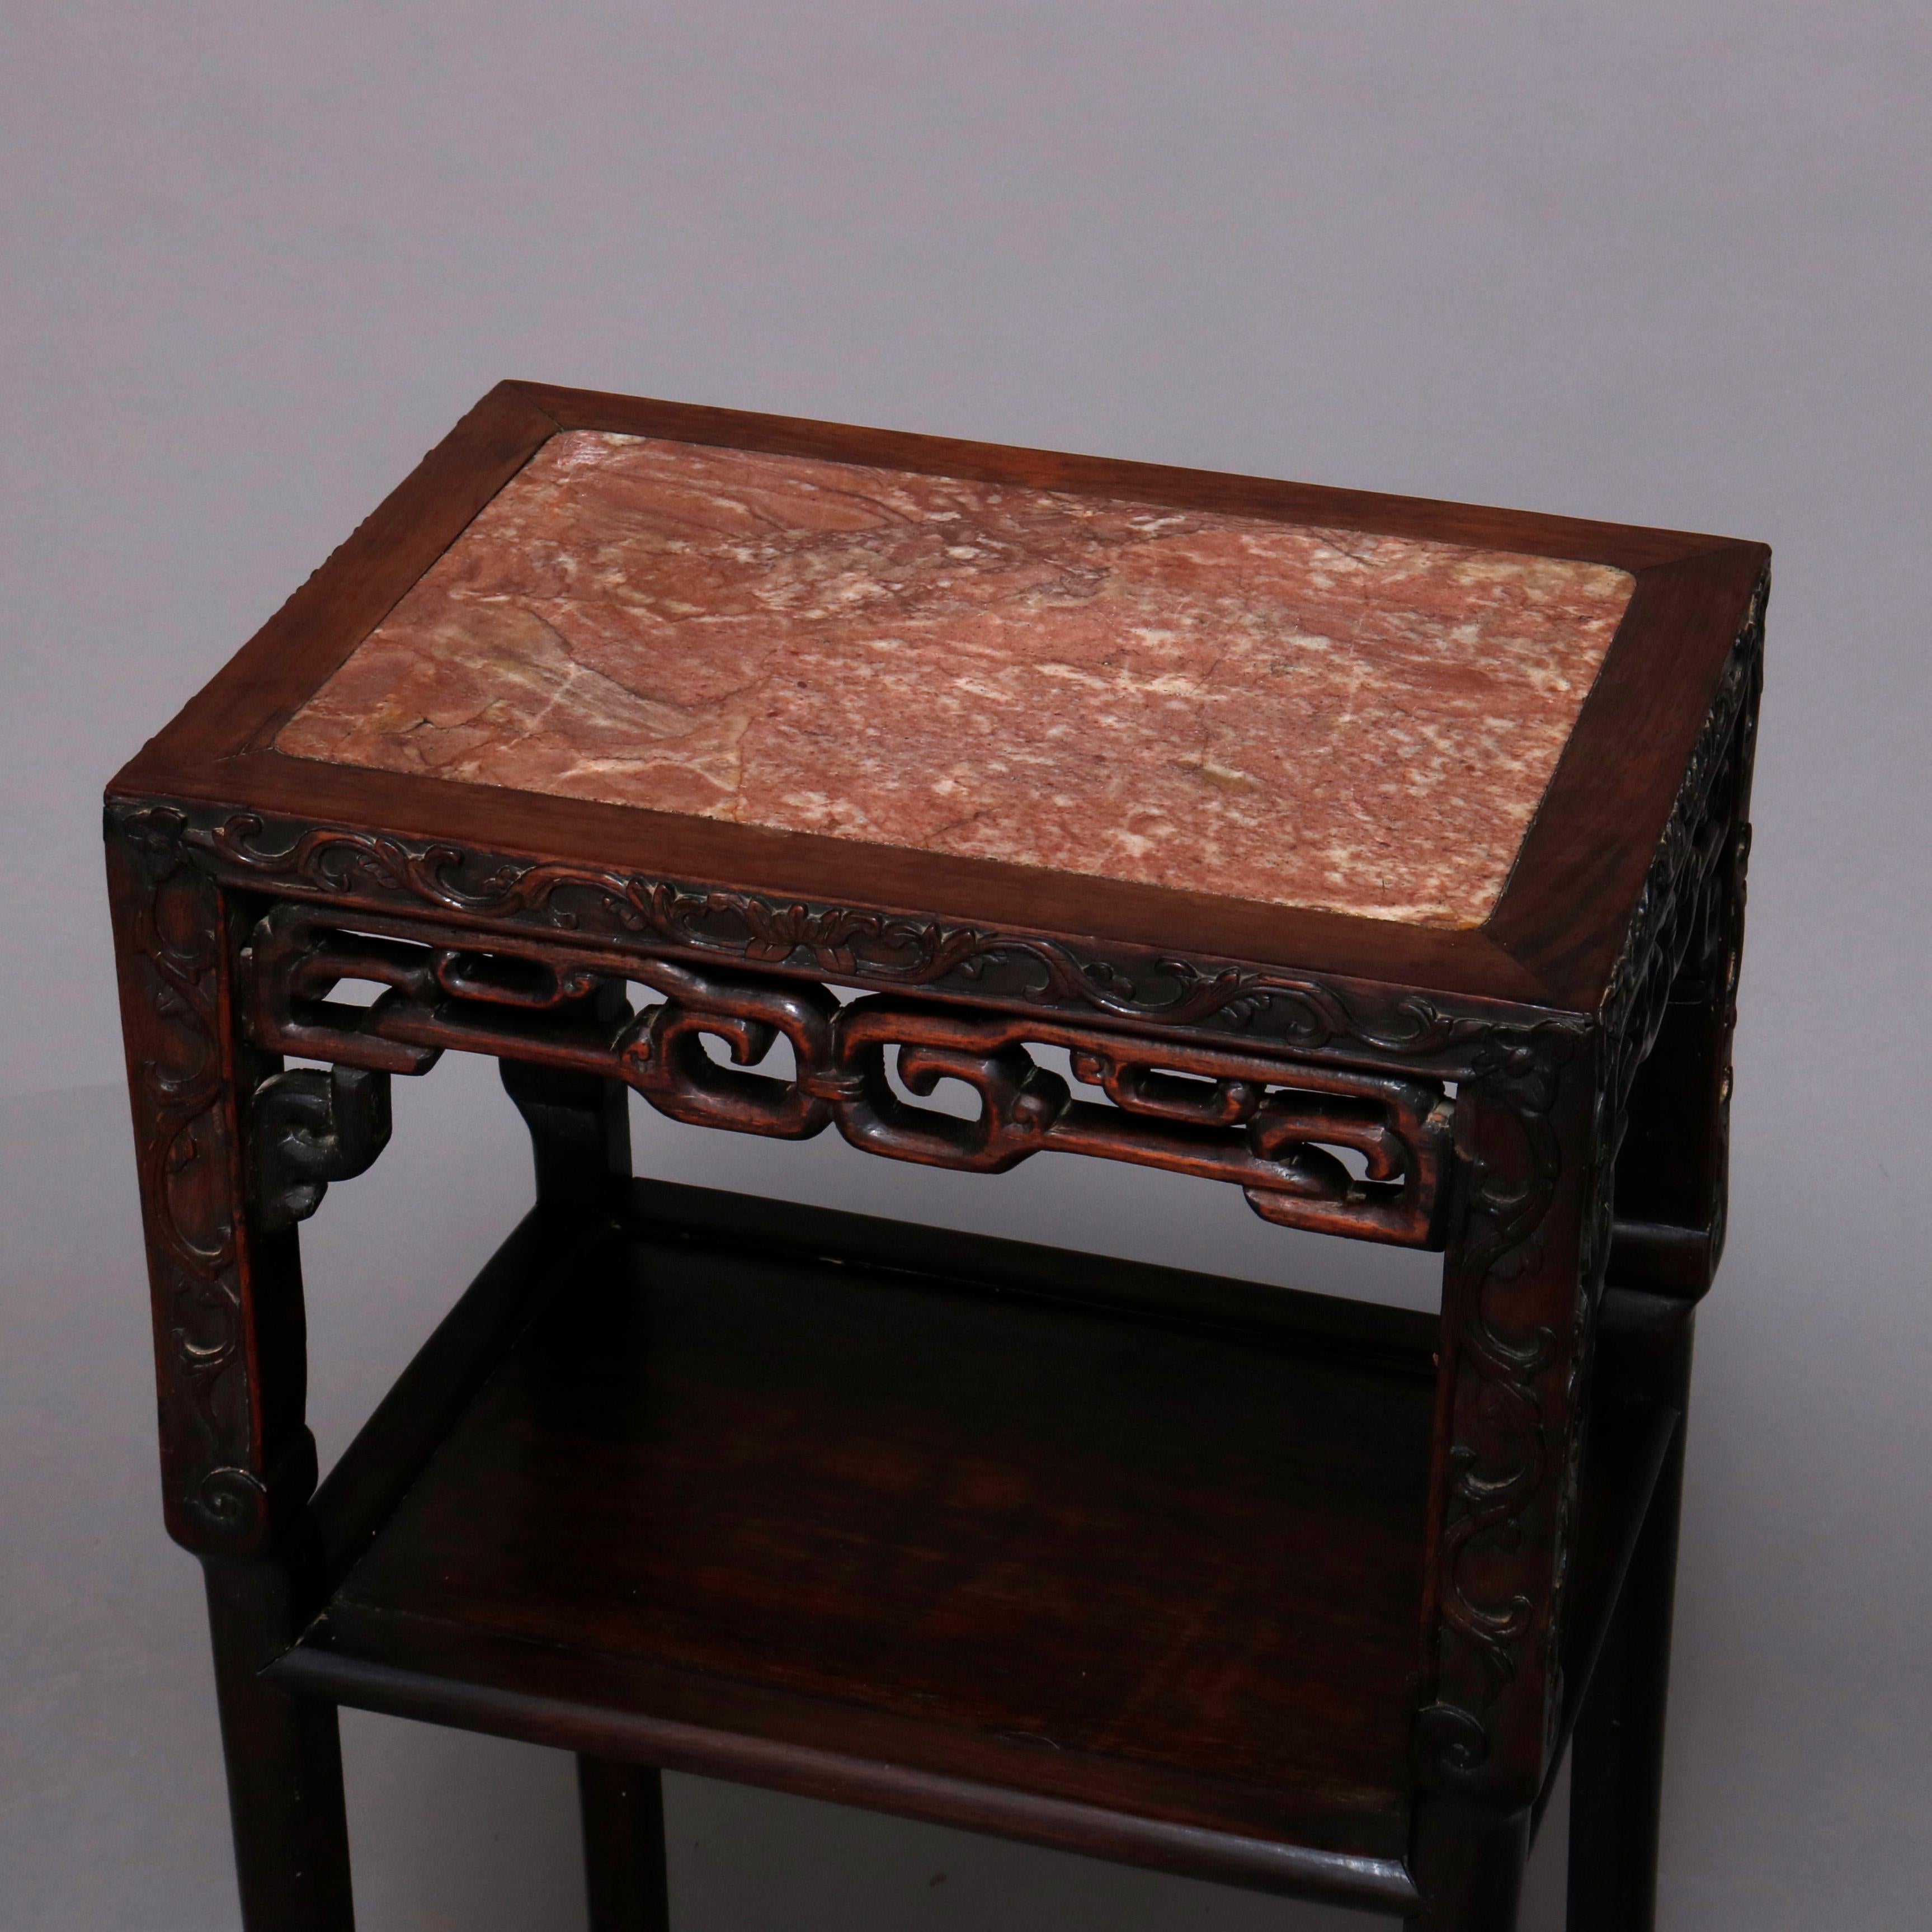 A vintage Chinese plant or side stand offers inset marble top seated in carved hardwood frame having pierced skirt and lower display shelf, 20th century.

***DELIVERY NOTICE – Due to COVID-19 we have employed LIMITED-TO-NO-CONTACT PRACTICES in the